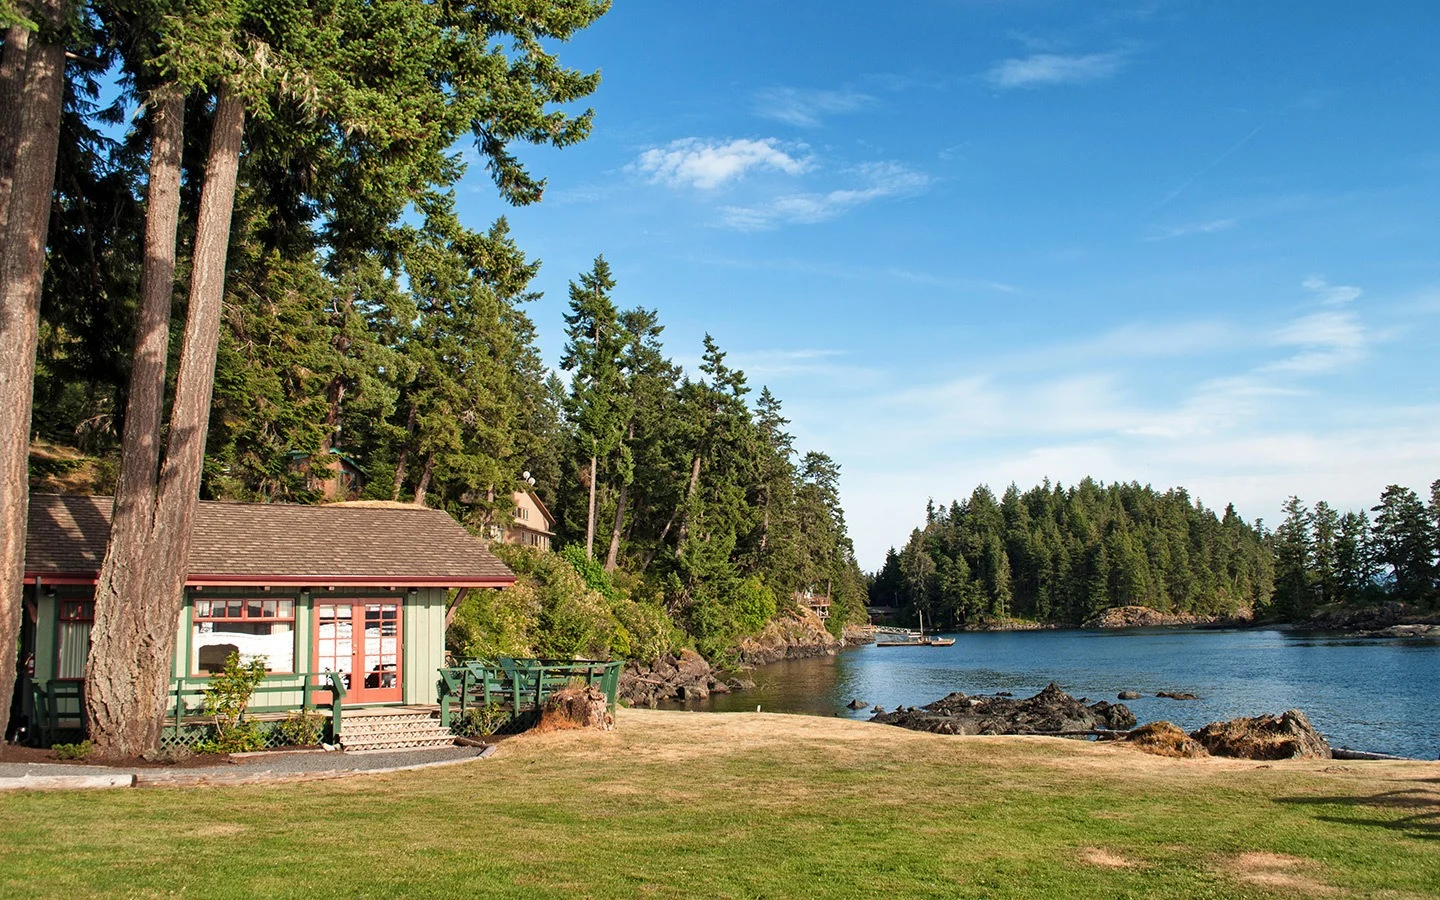 A Vancouver Island road trip: From the tip to the top